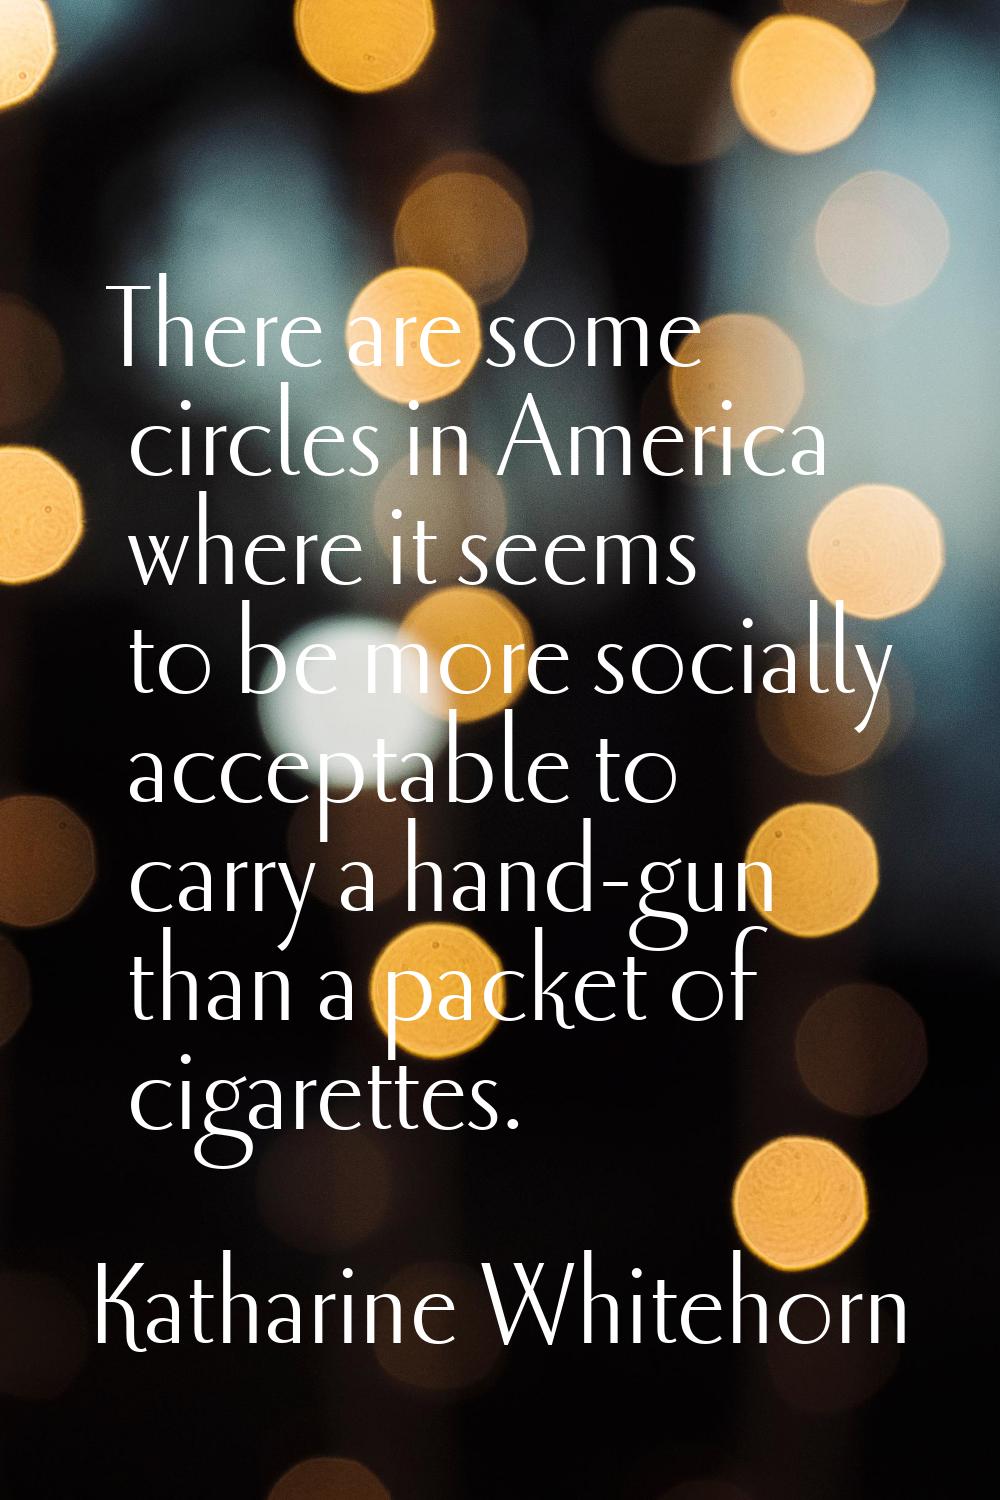 There are some circles in America where it seems to be more socially acceptable to carry a hand-gun